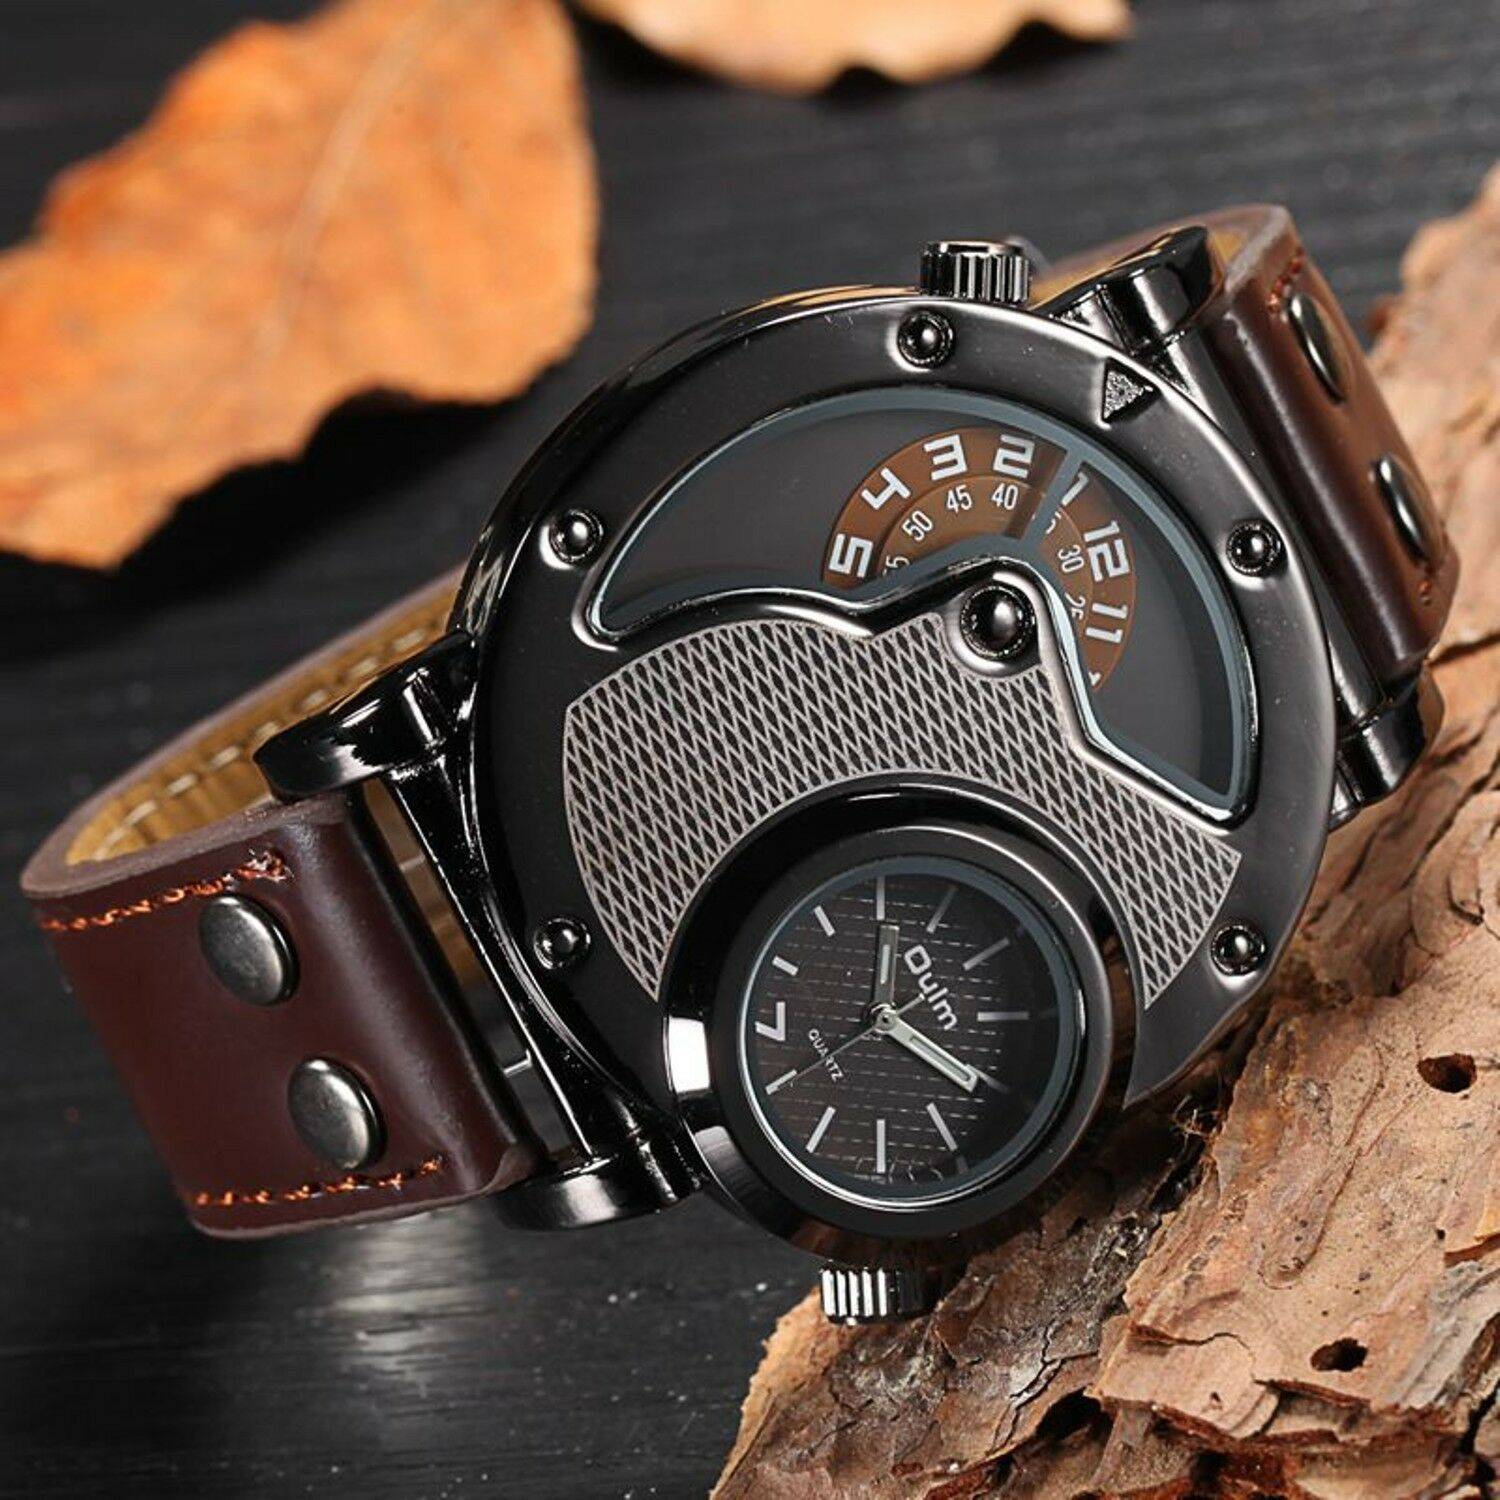 Antique two time zone wristwatch with elegant design4